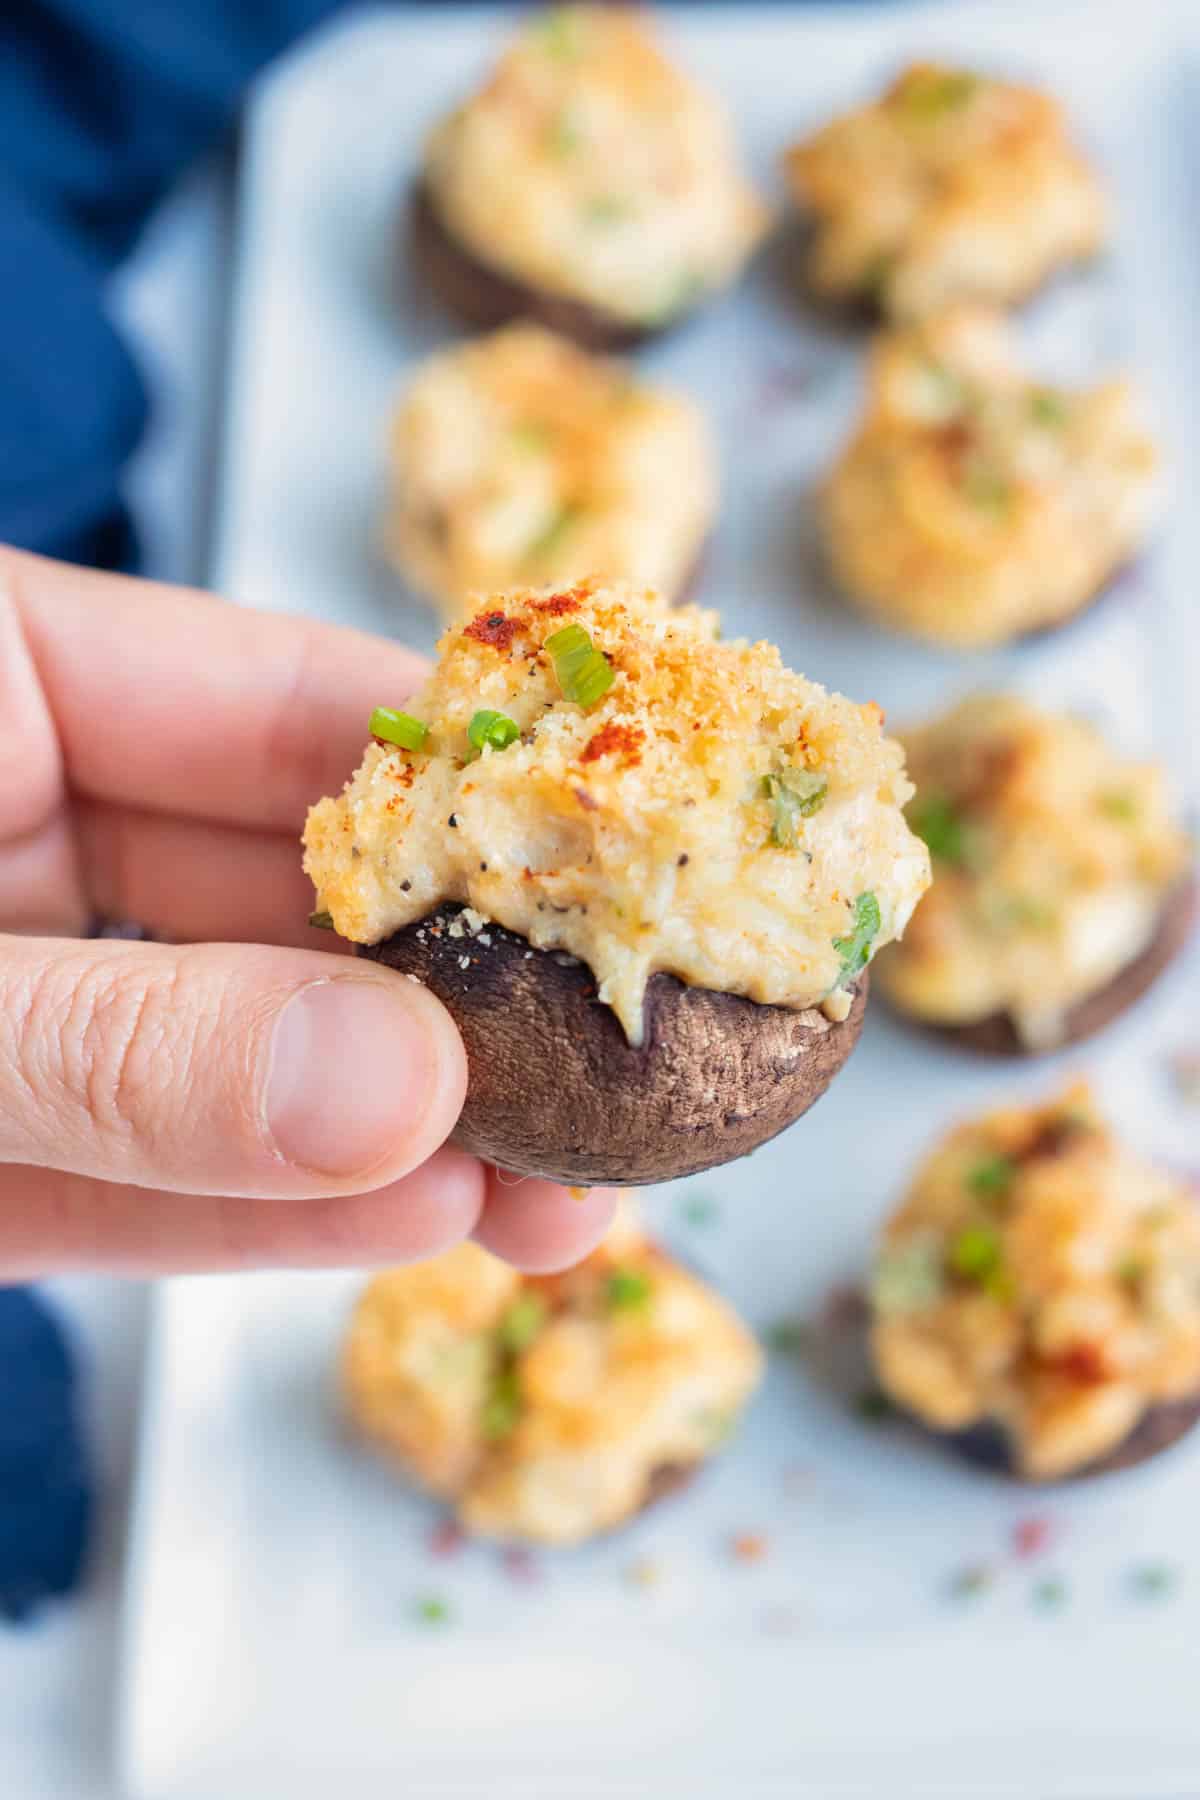 Keto crab stuffed mushrooms are enjoyed for a party appetizer.